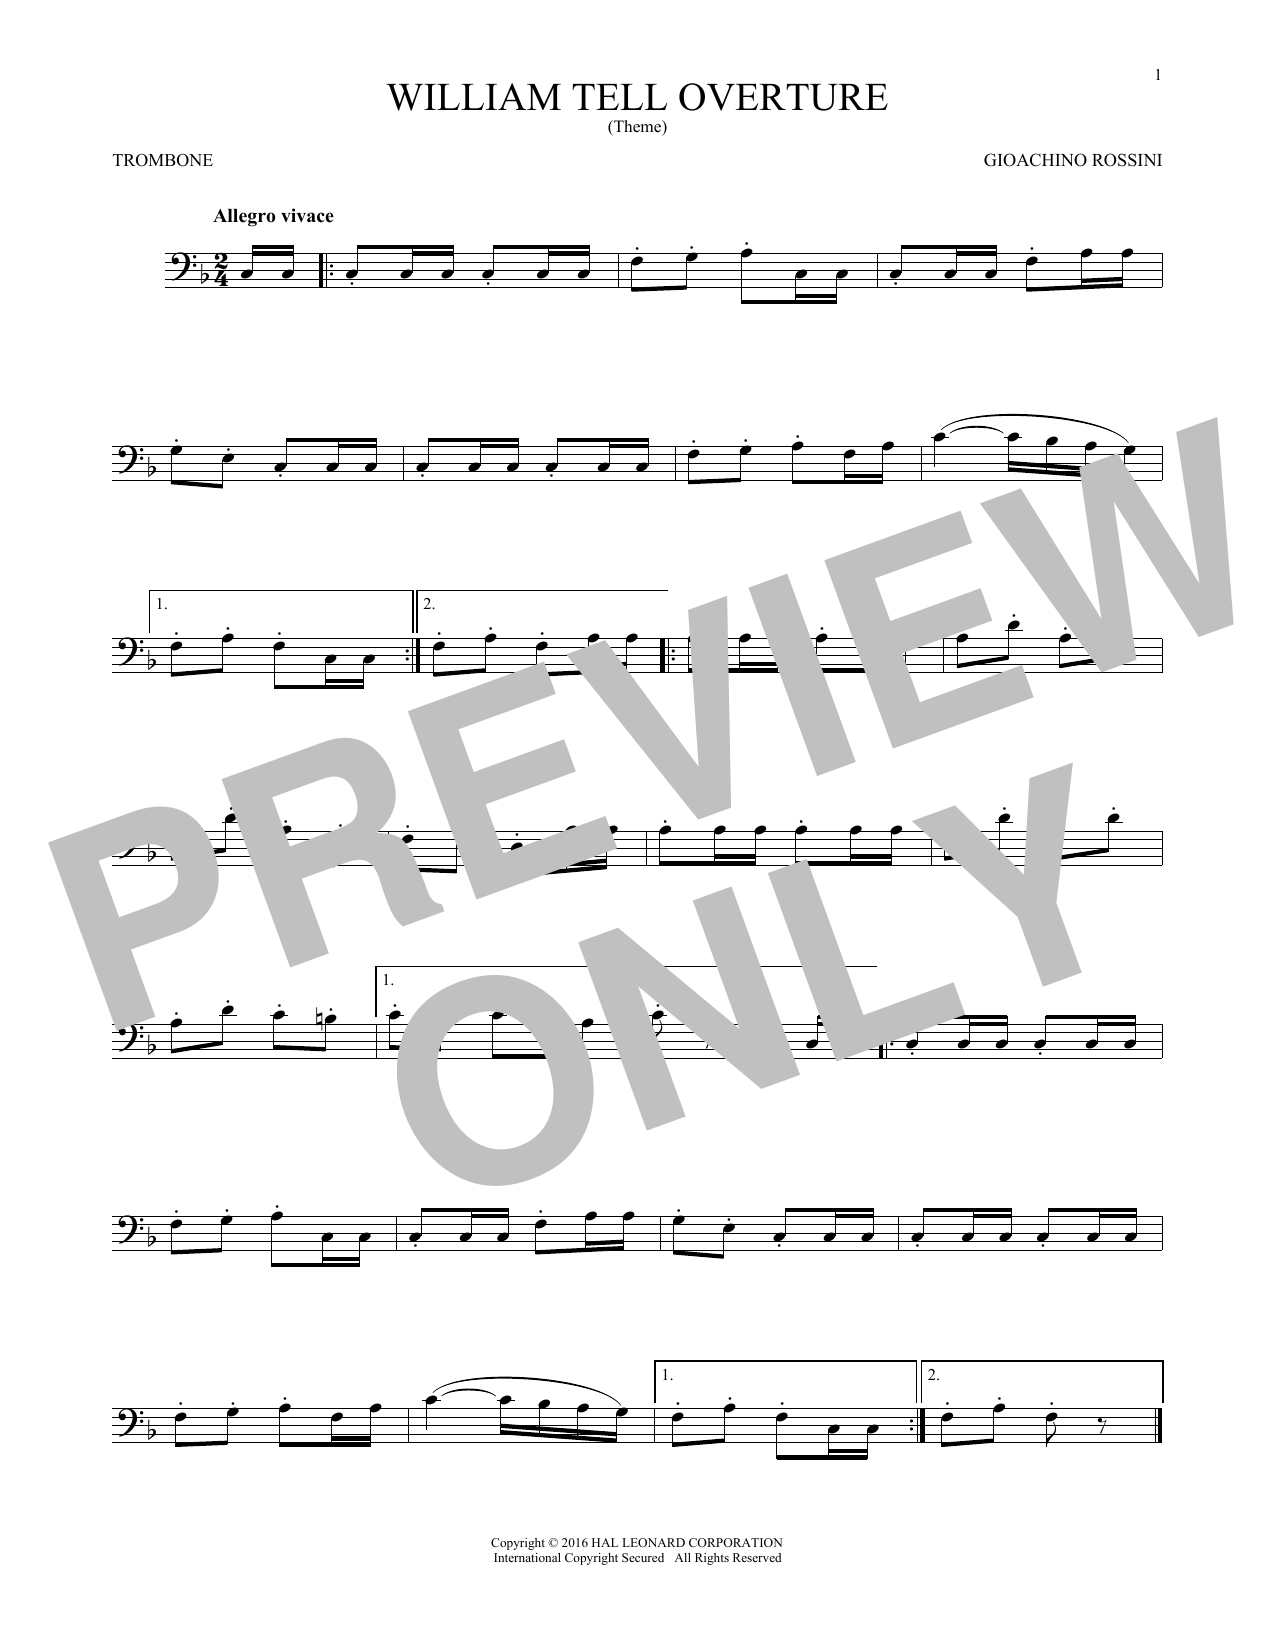 Download G. Rossini William Tell Overture Sheet Music